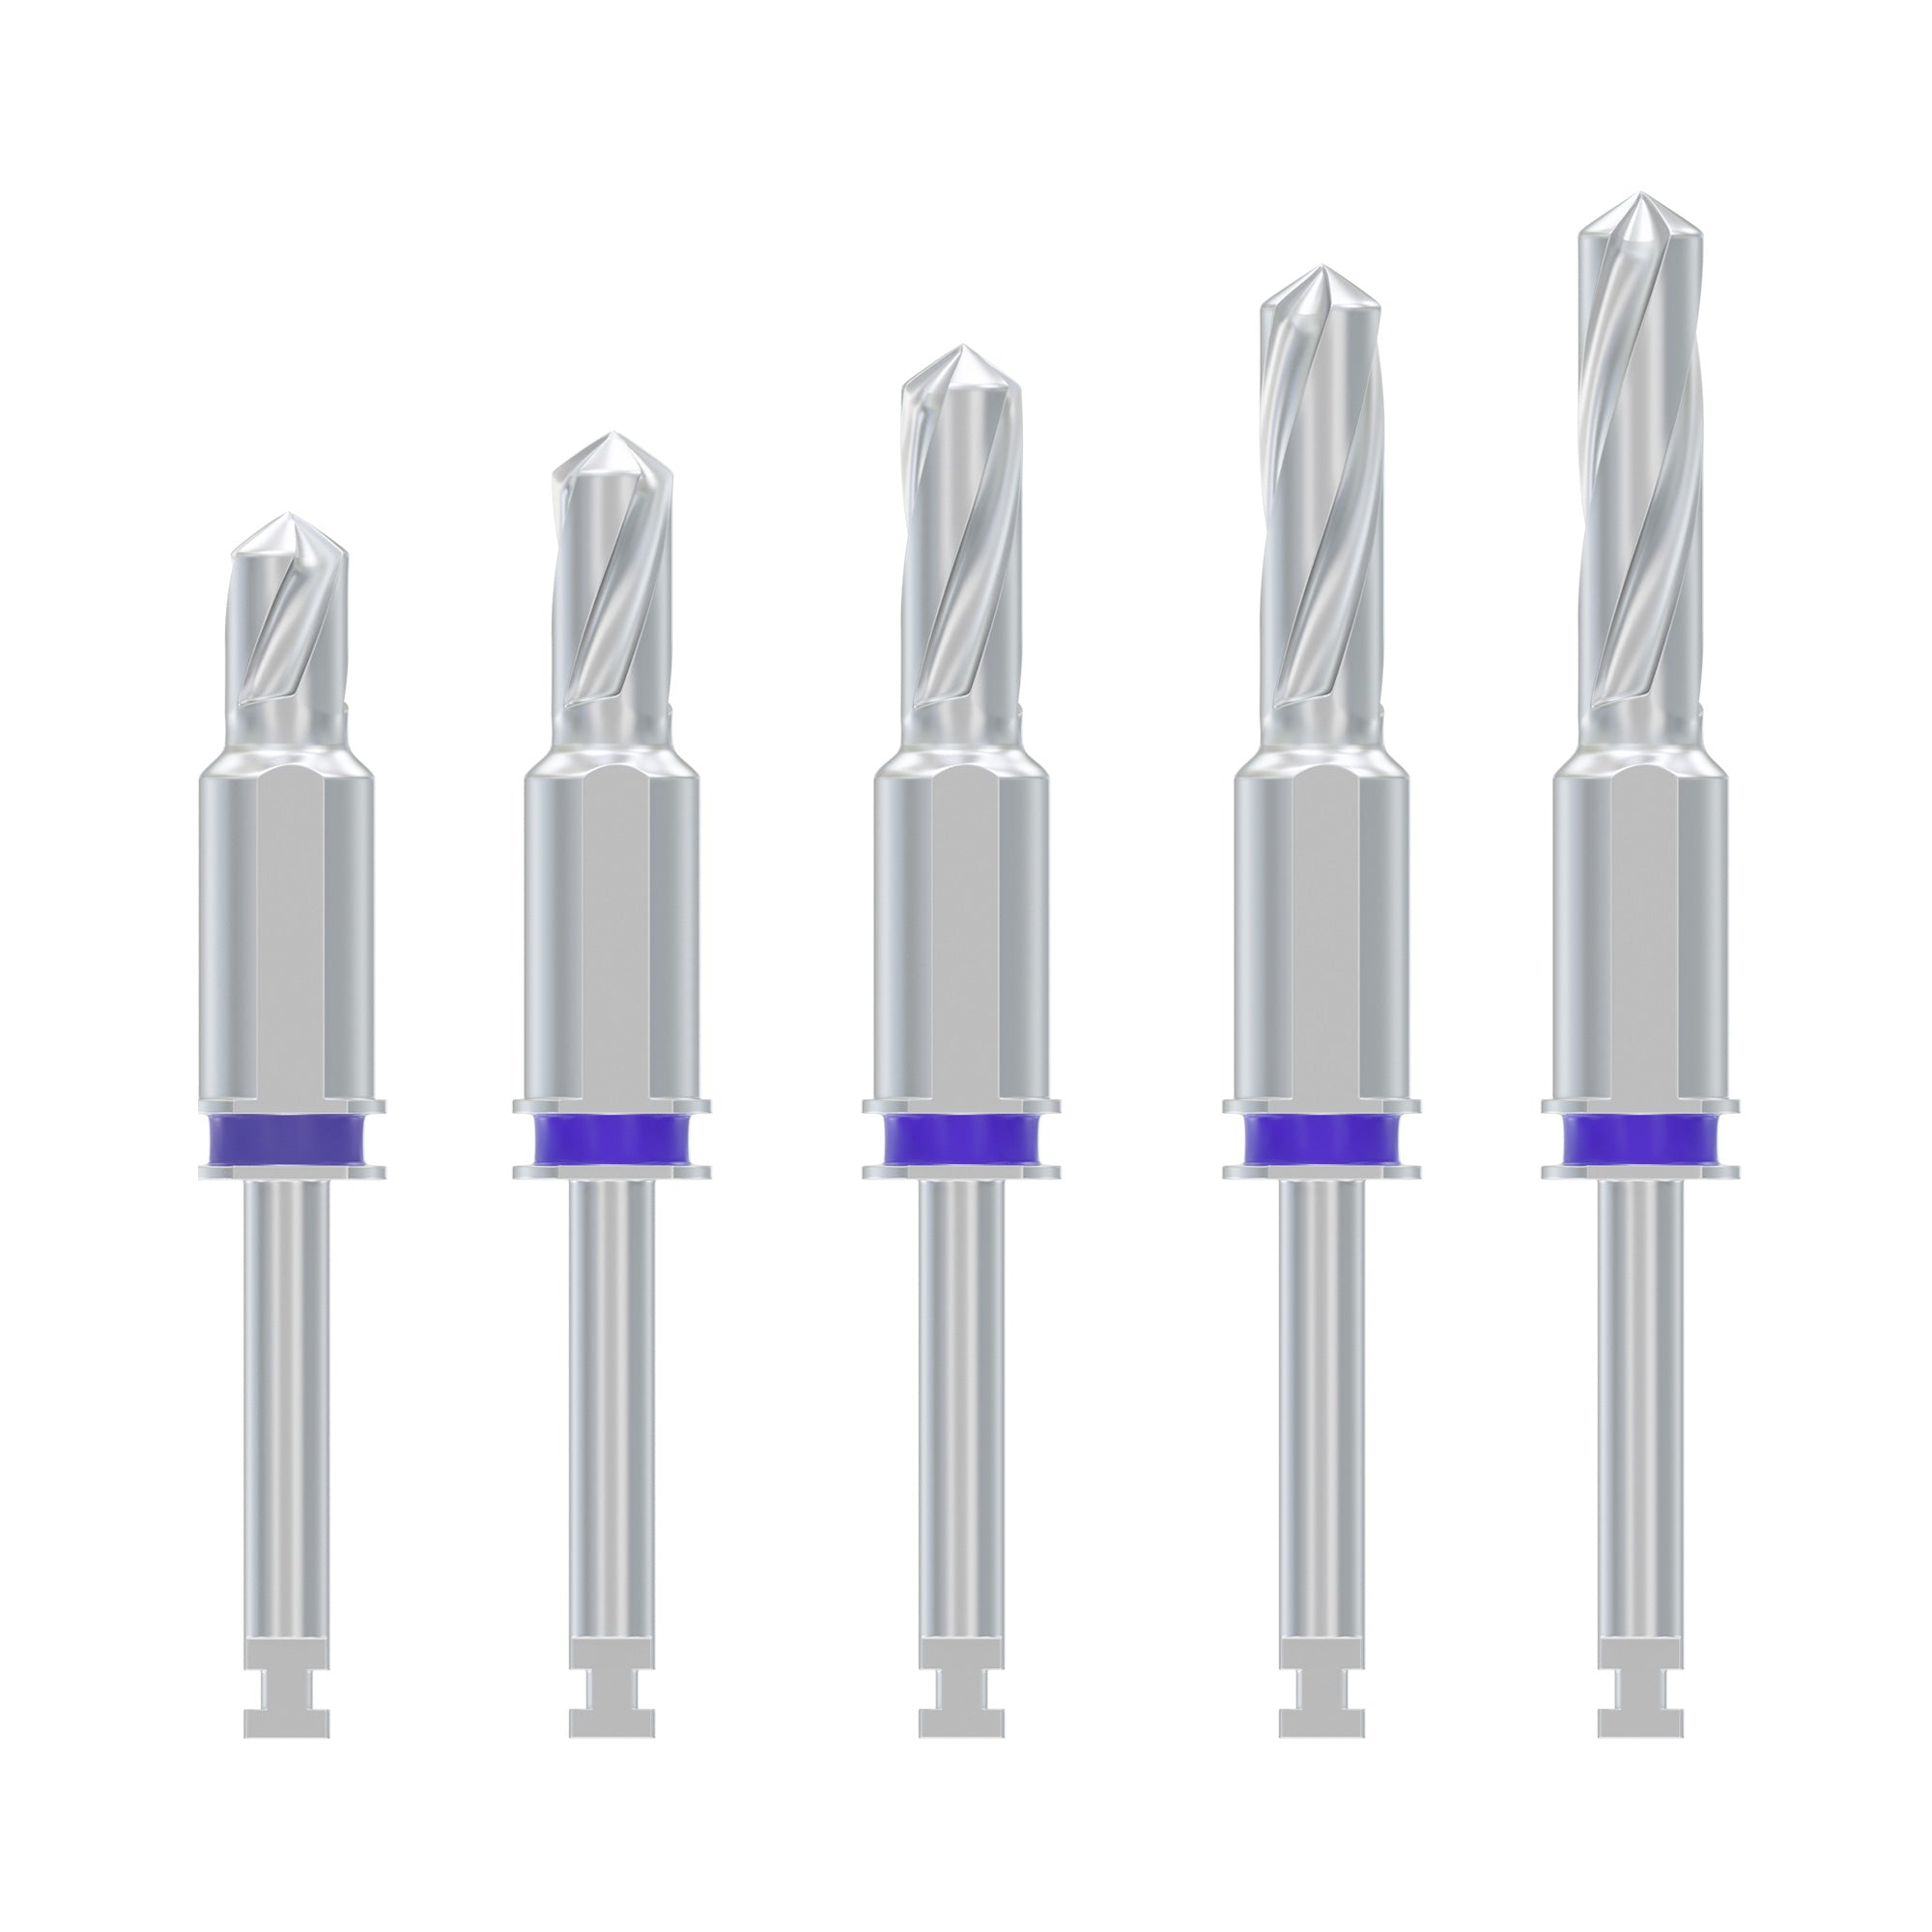 DSI Surgical Guided Stopper Drills For Surgical Guide